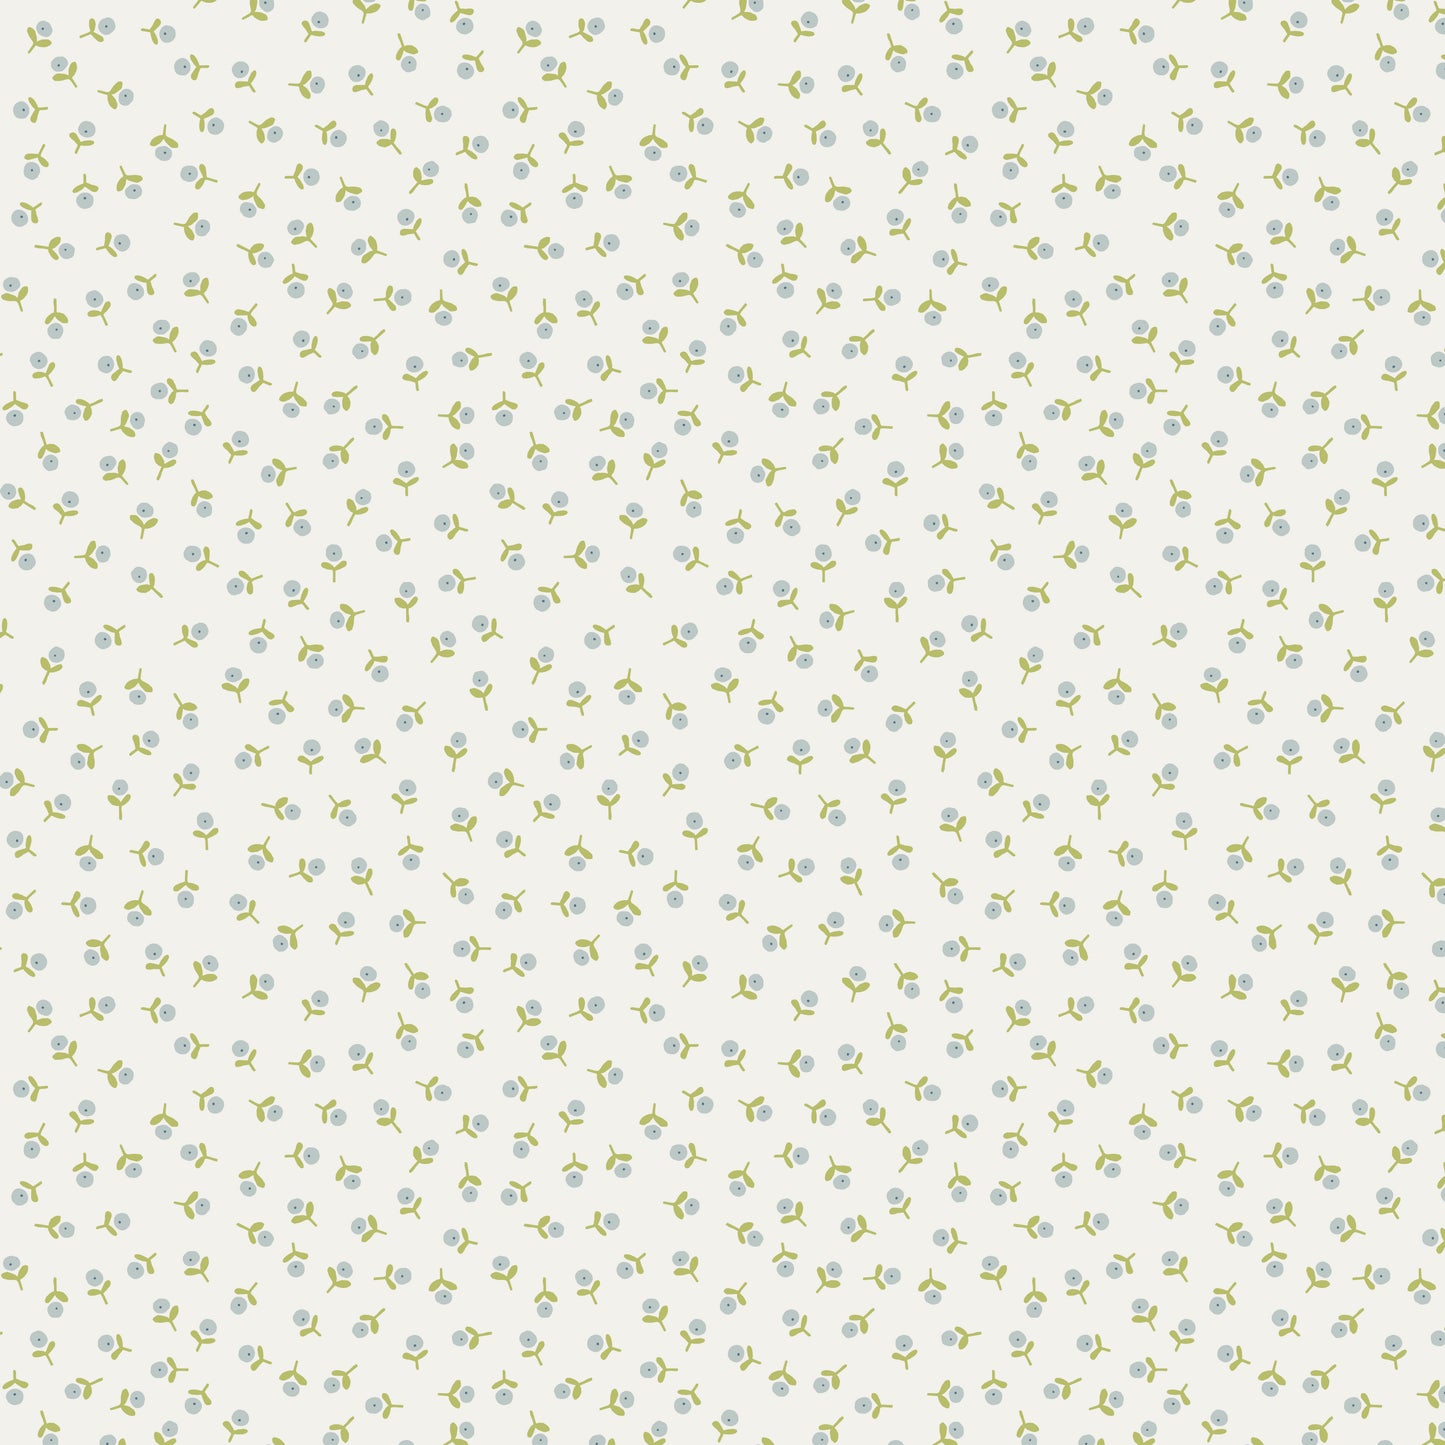 Sunkissed Sojourn White Floral DV6120 by Natalie Bird of Birdhouse Designs for Devonstone (sold in 25cm increments)